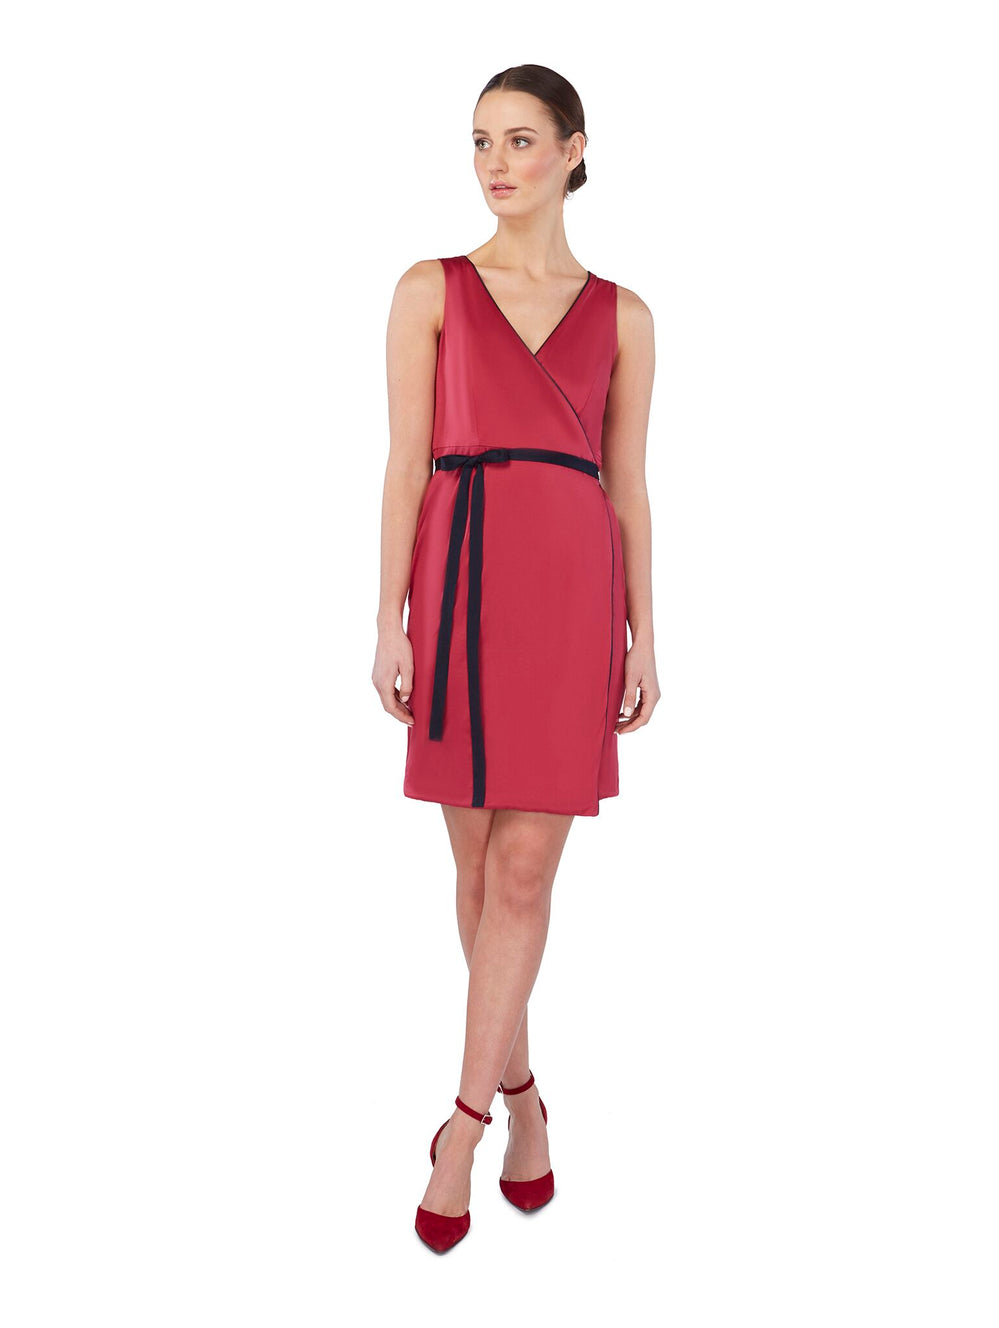 Front view of VANDA reversible wrap dress in navy/red mix, available from British sustainable fashion brand DEPLOY